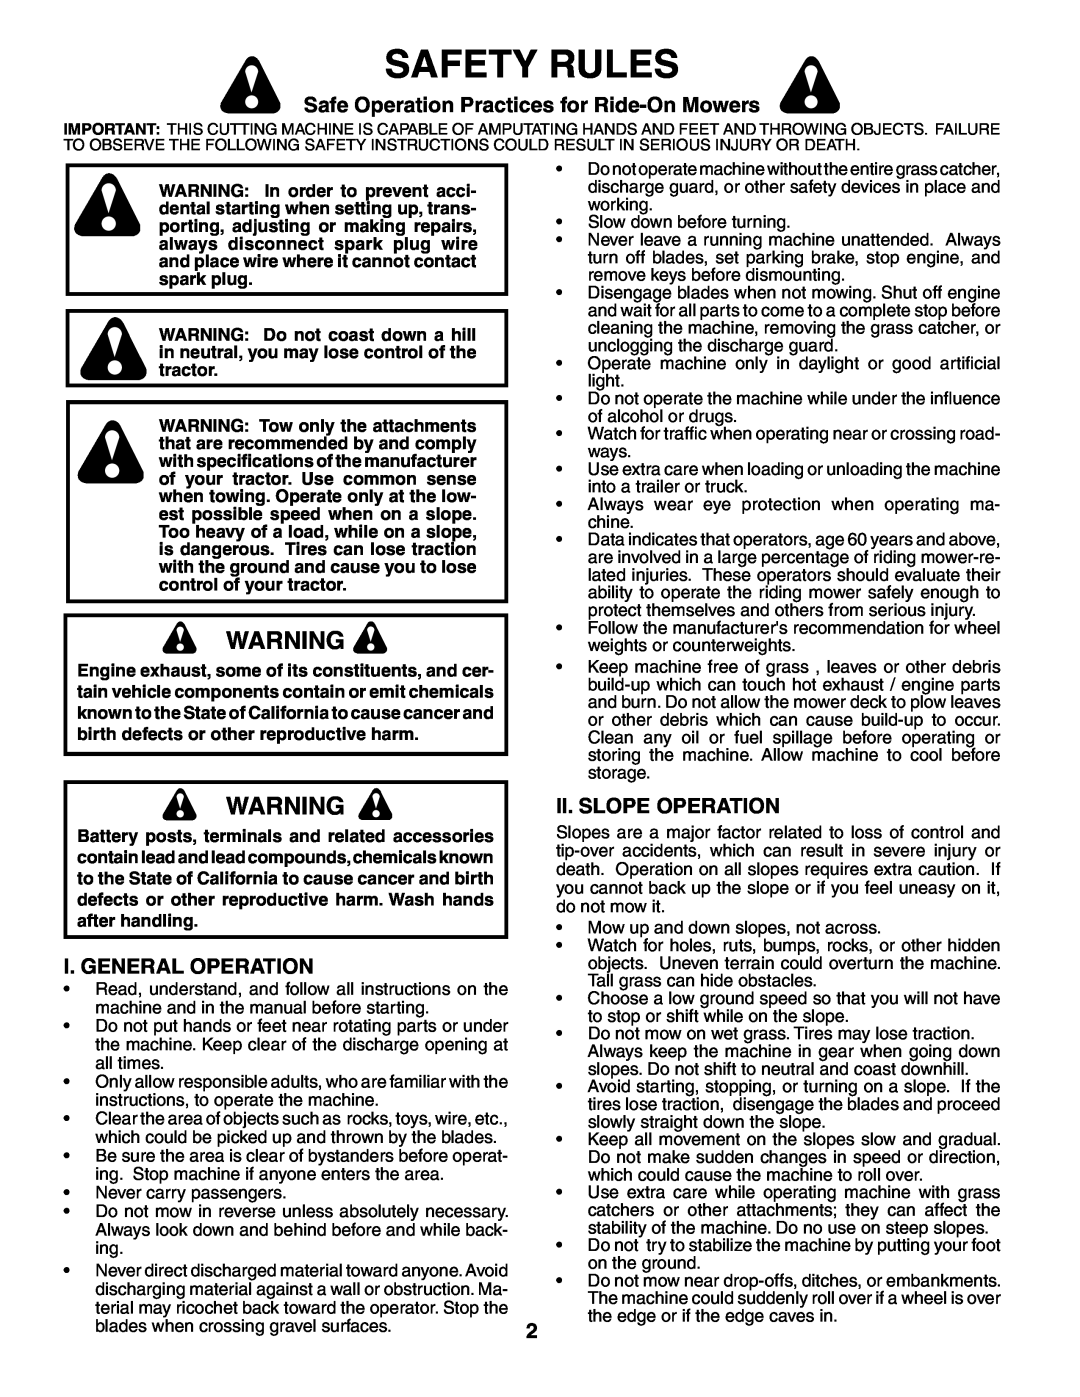 Weed Eater 195383 Safety Rules, Safe Operation Practices for Ride-On Mowers, I. General Operation, Ii. Slope Operation 